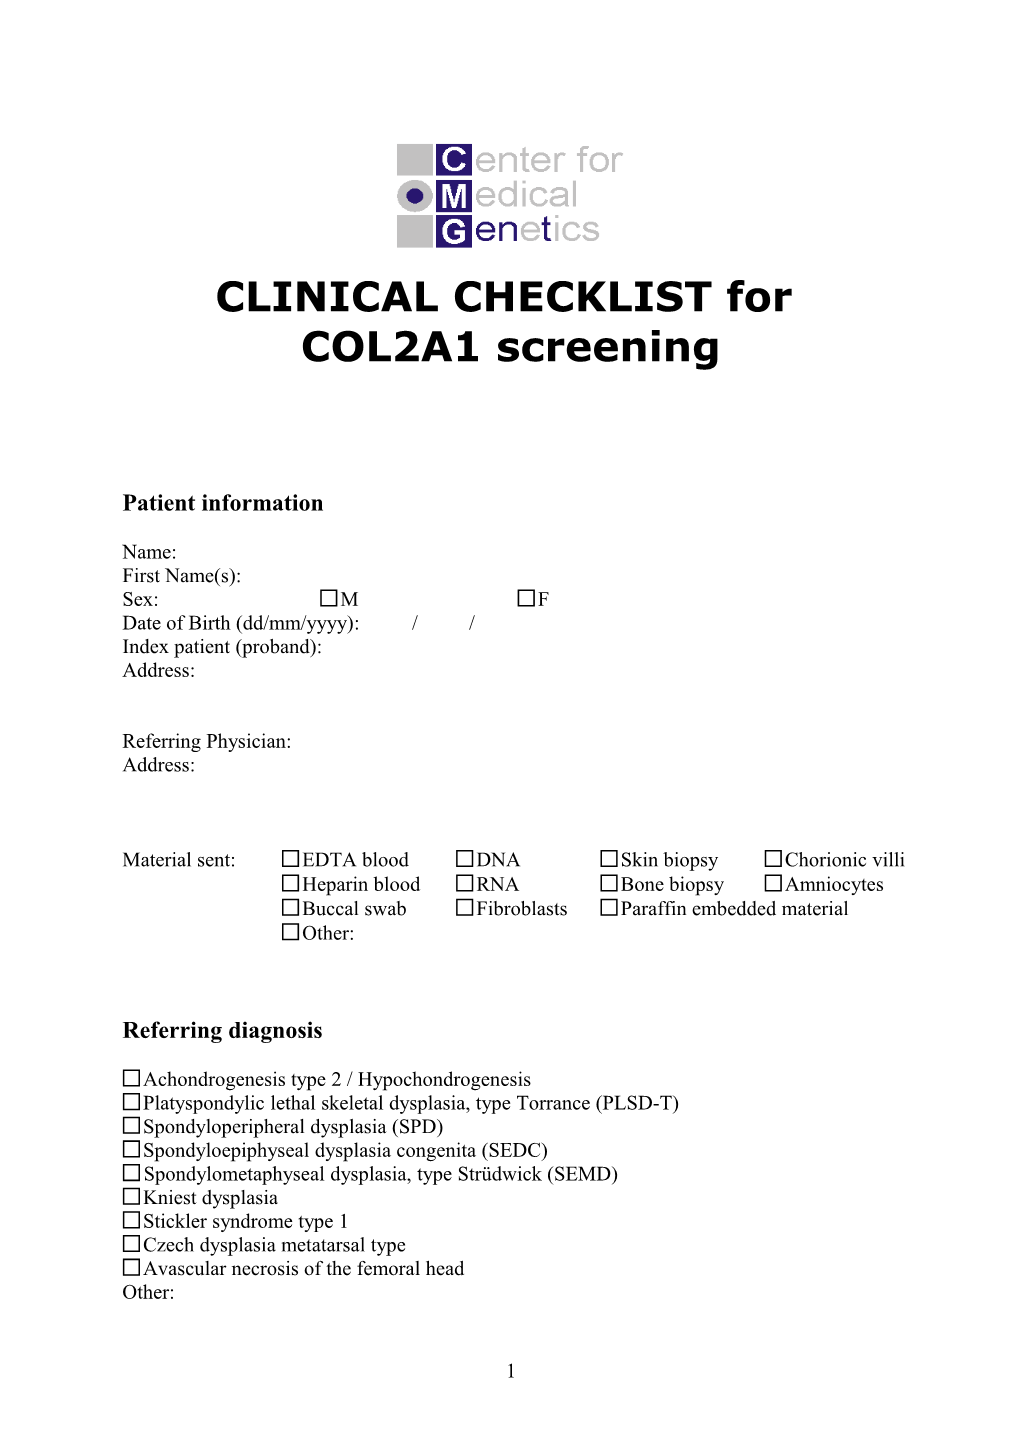 CLINICAL CHECKLIST For